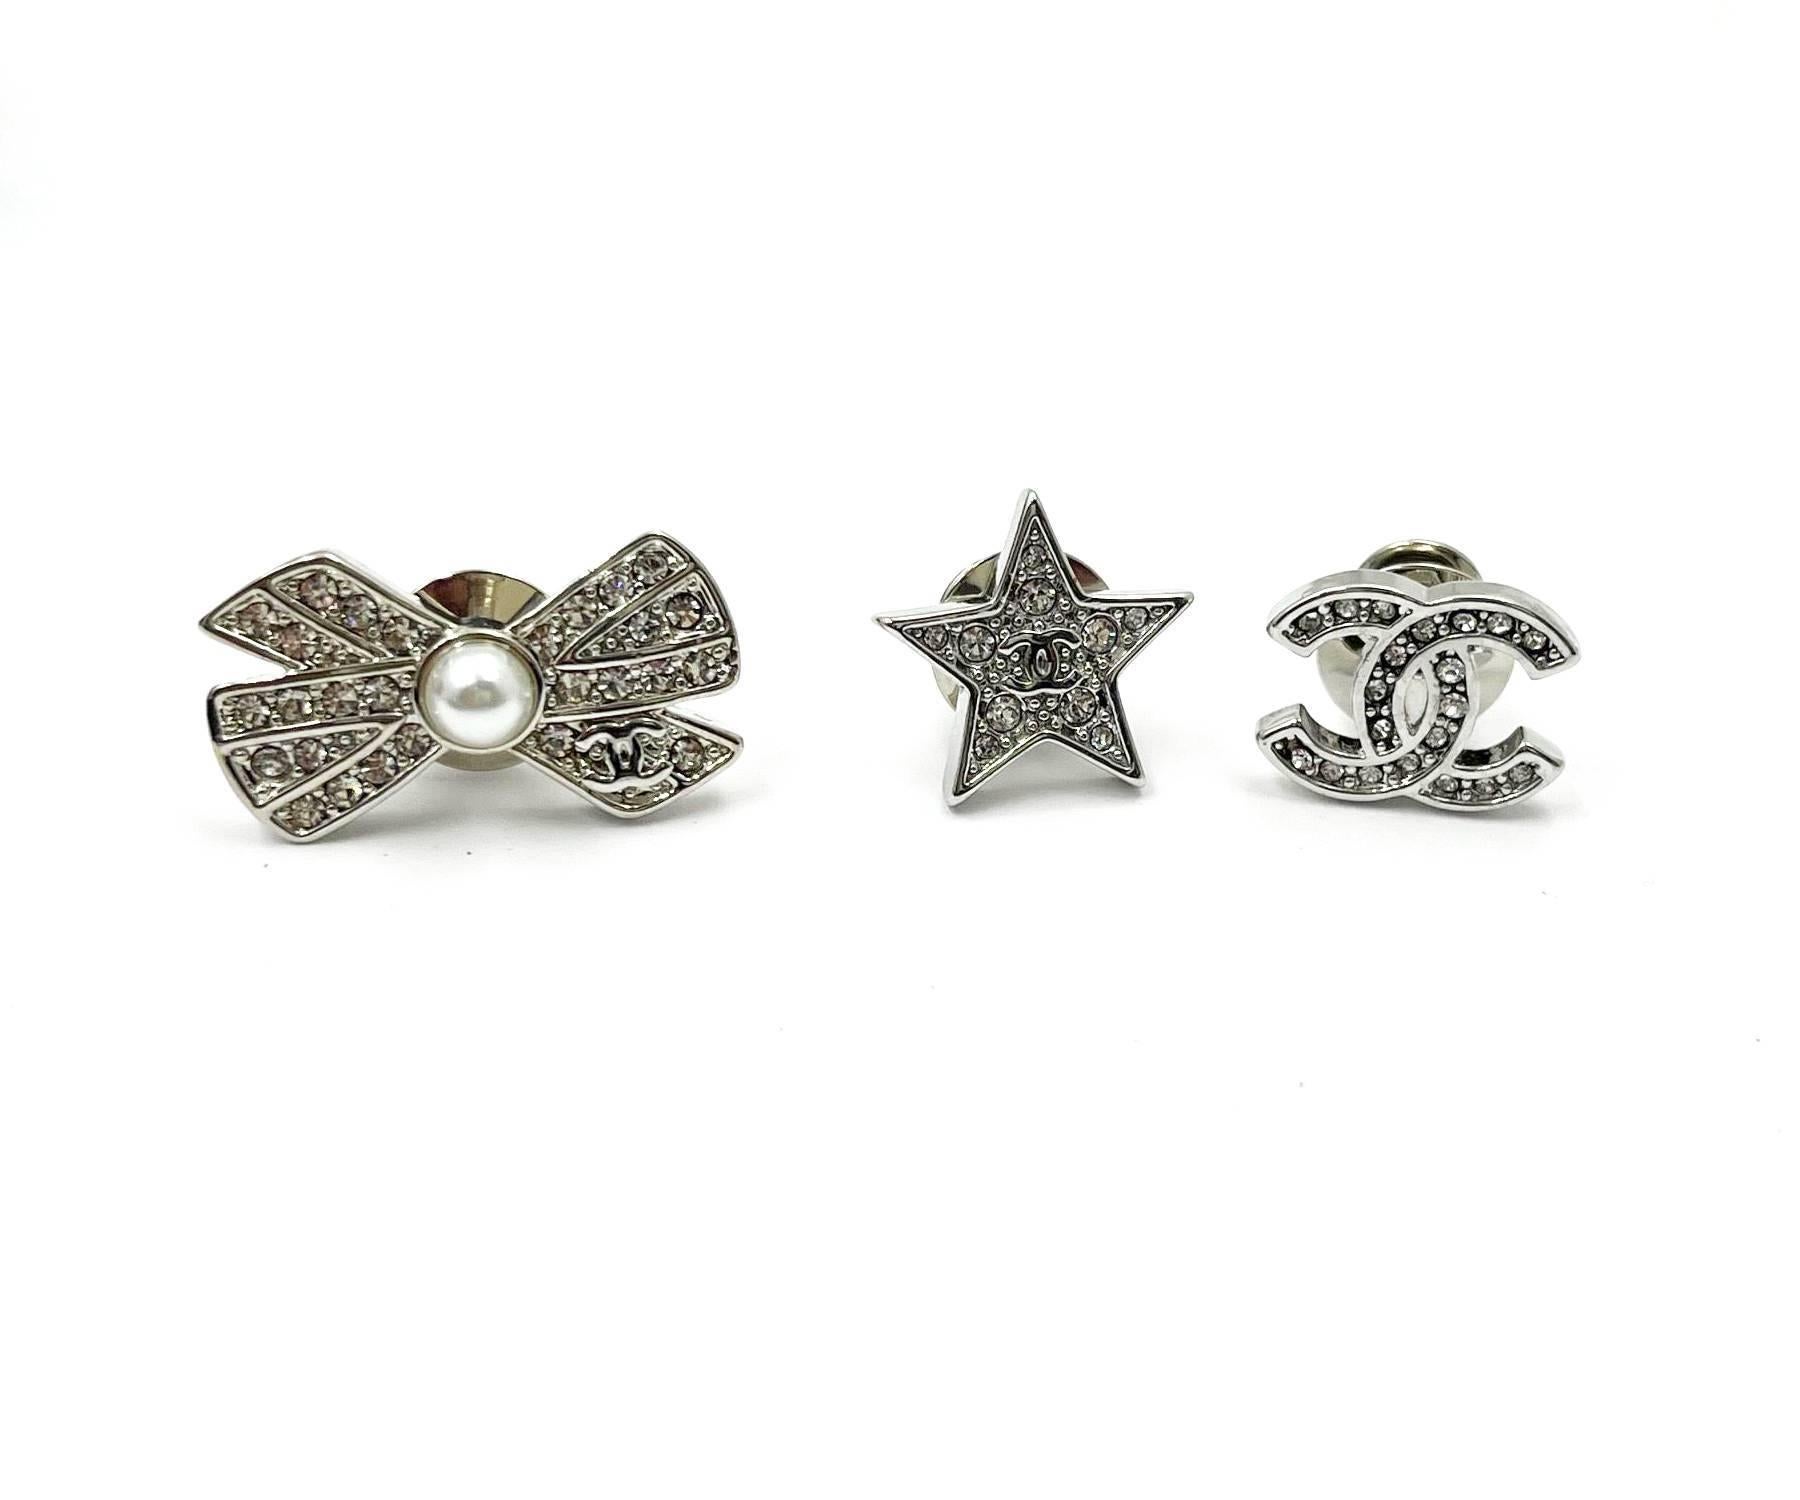 Chanel Brand New Silver CC Star Bow Crystal 3 Pins Brooch In New Condition For Sale In Pasadena, CA